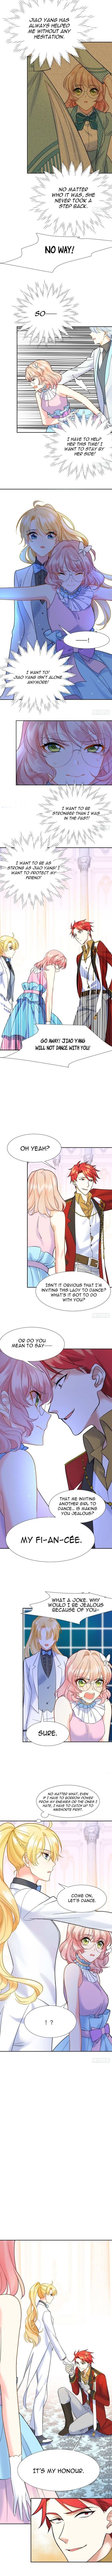 Destined Pair? I Disagree! chapter 6 - page 7